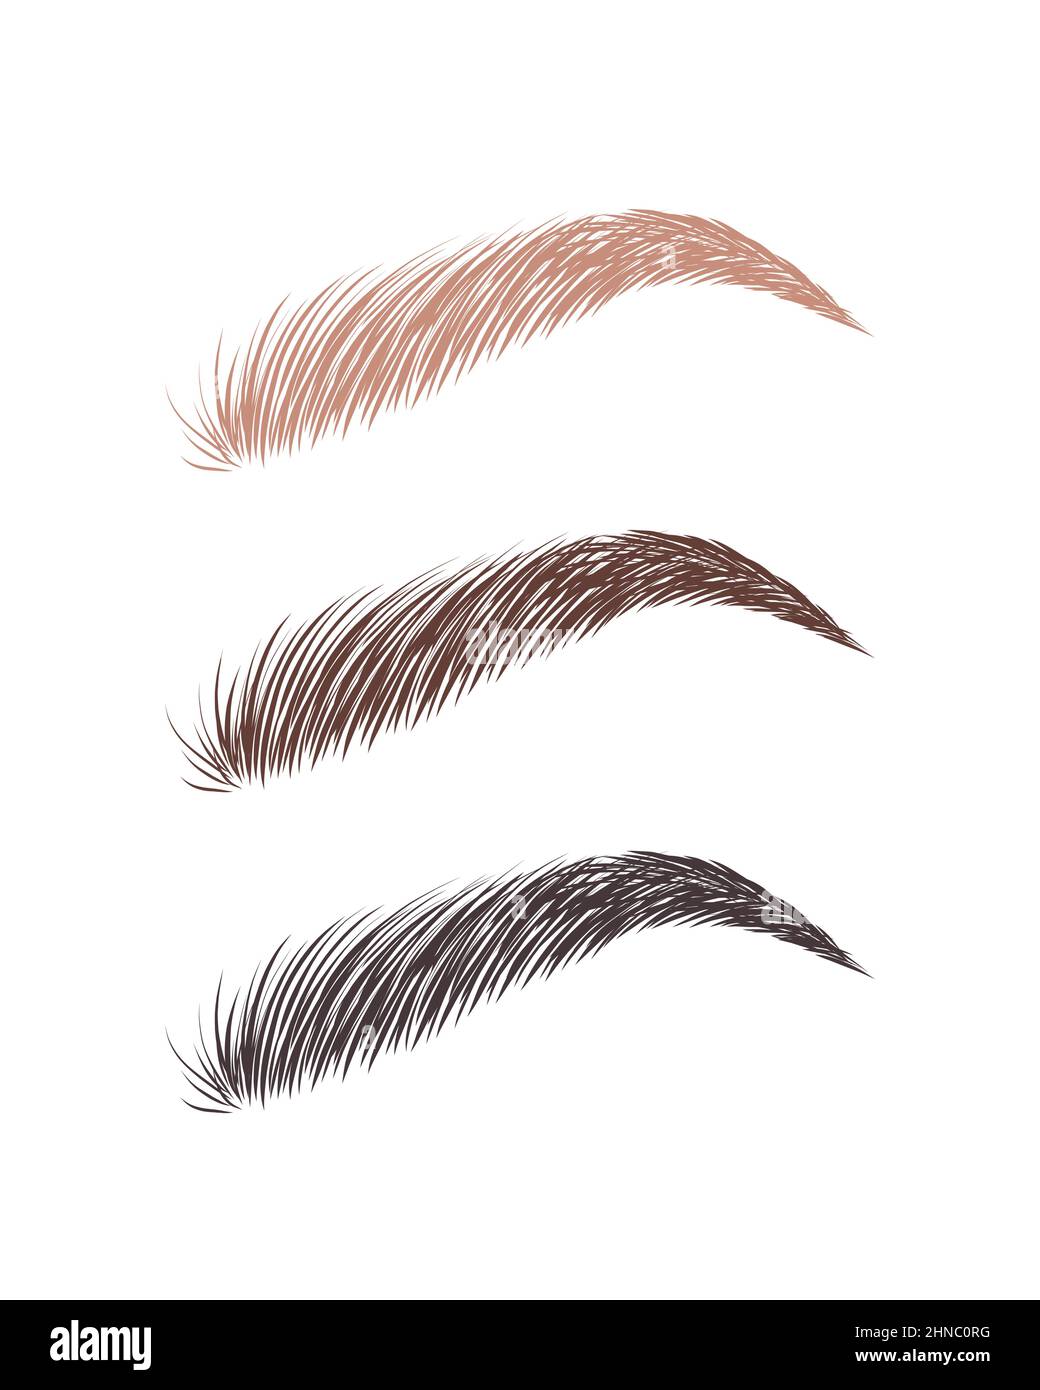 Female eyebrows in various colors. Blonde, brown and dark hair. Arch brows shapes. Linear vector Illustration in trendy minimalist style. Brow bar Stock Vector